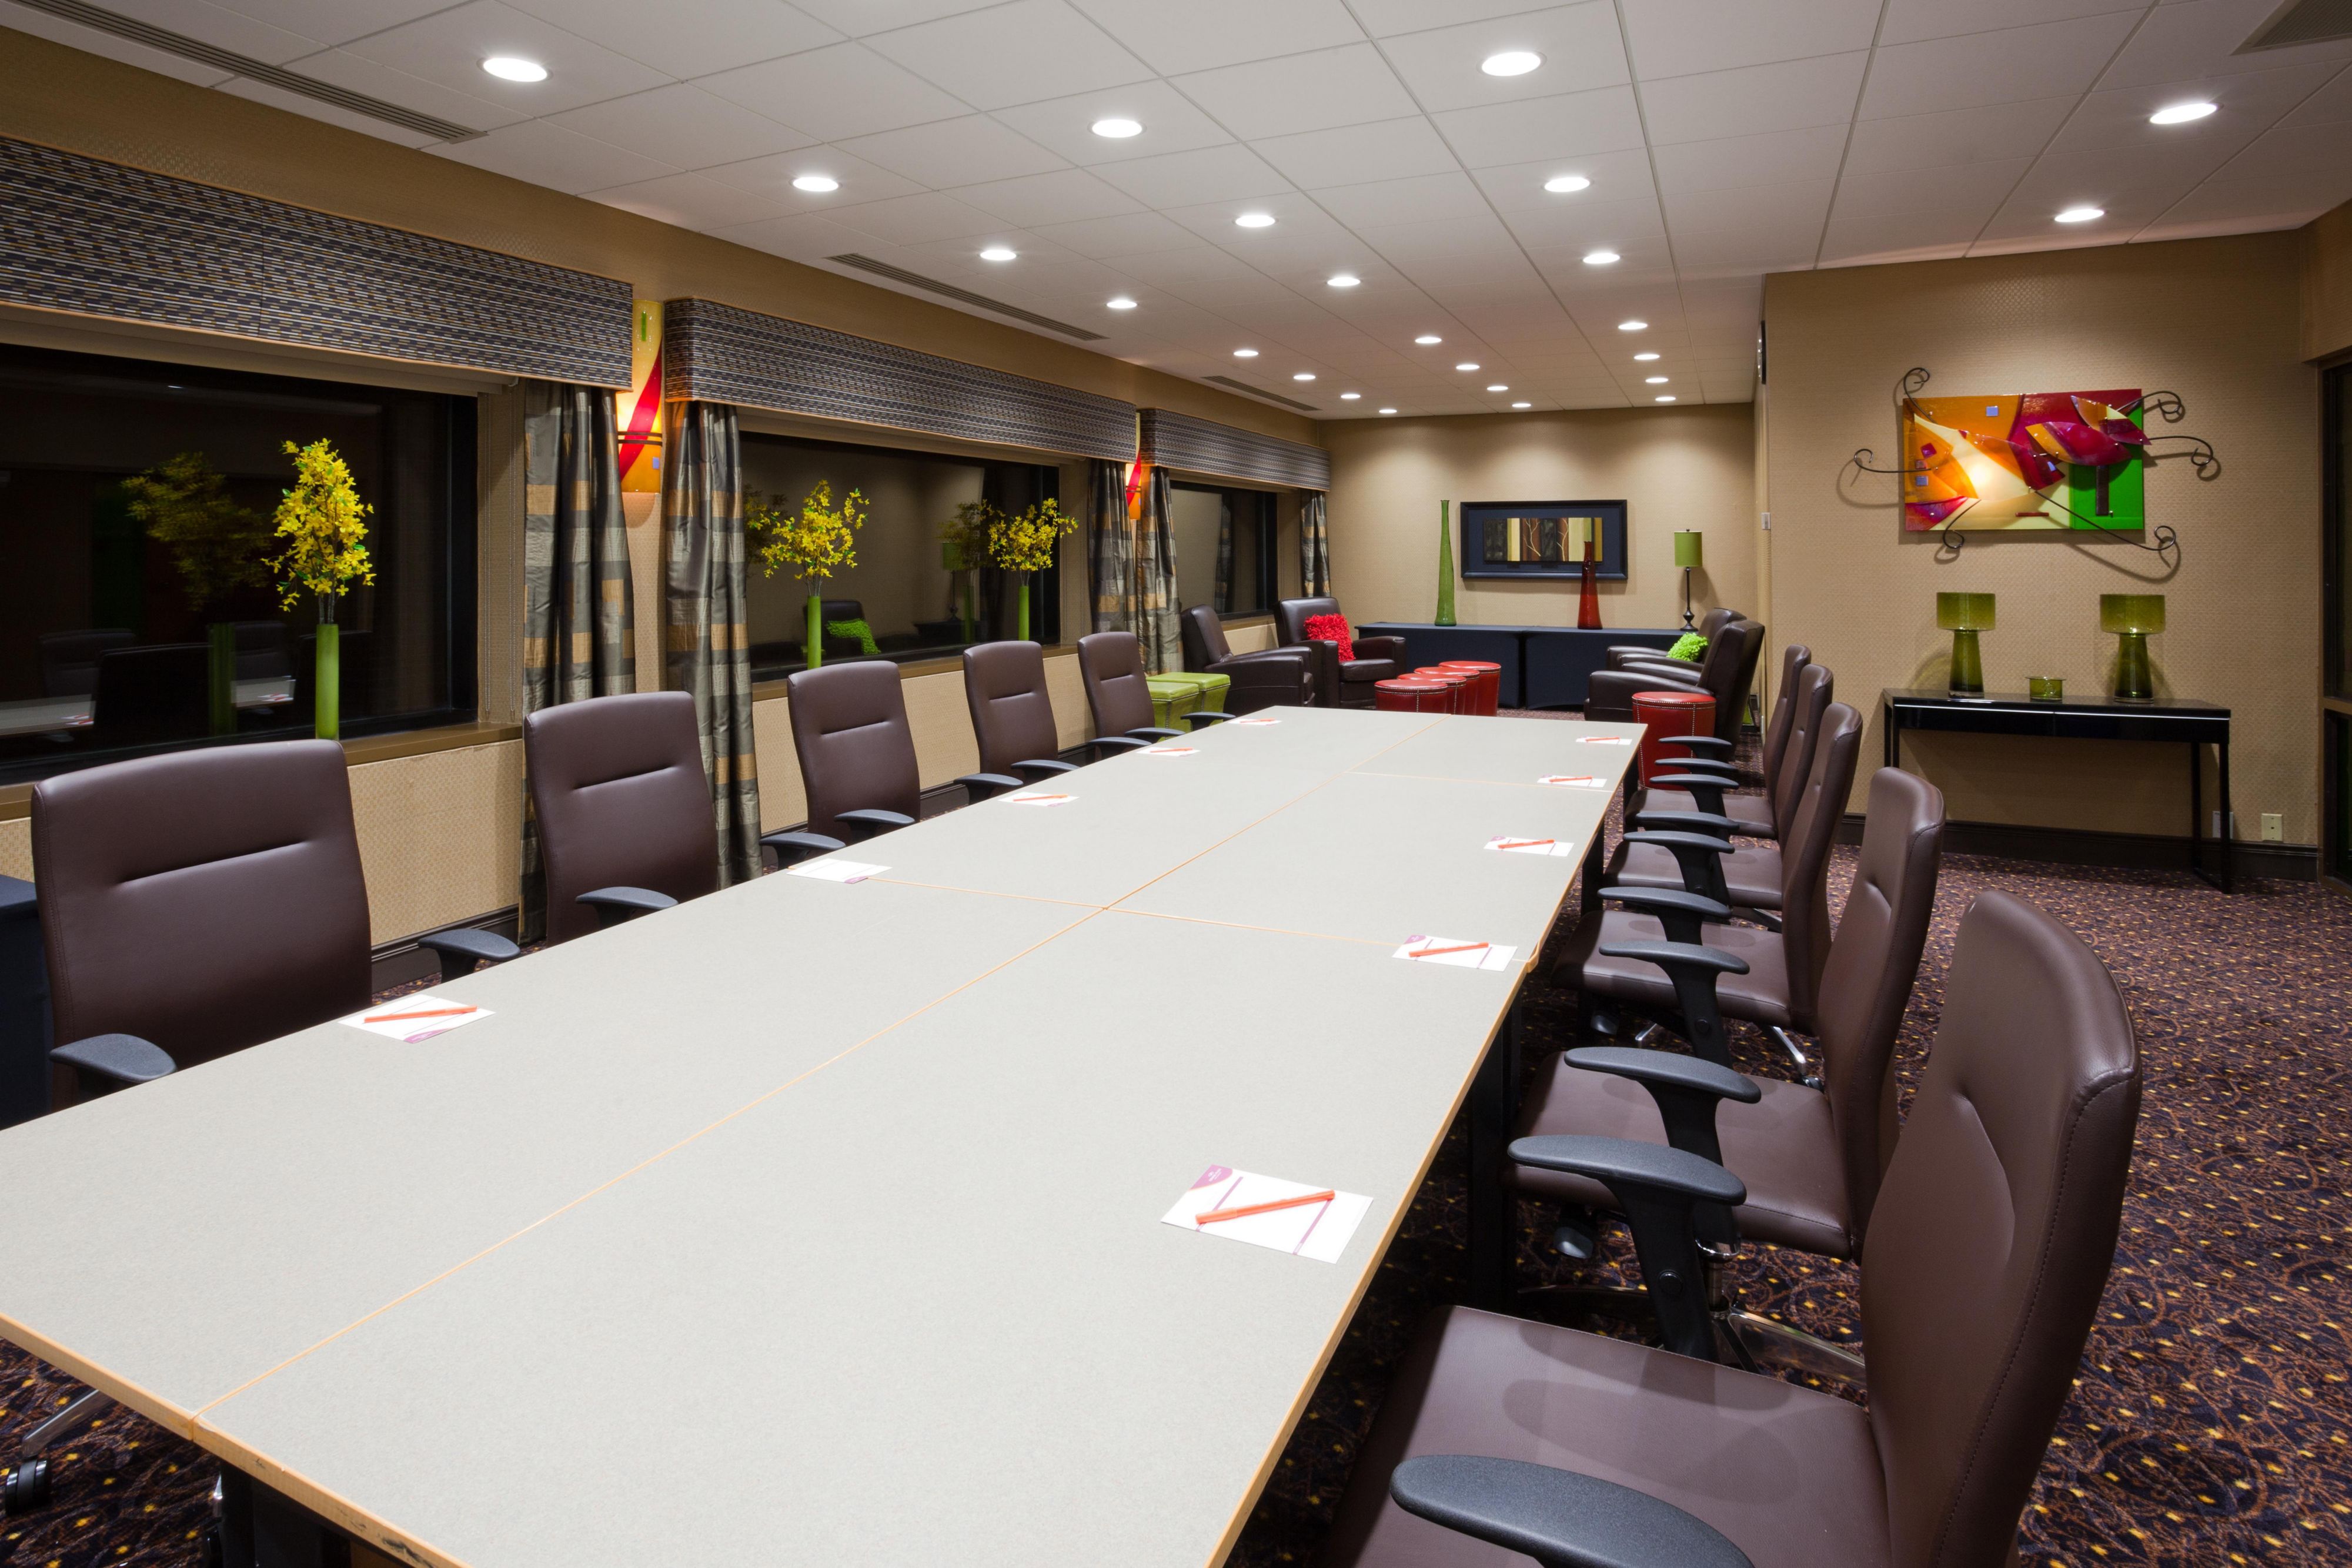 Studio 16 meeting room with long board room table